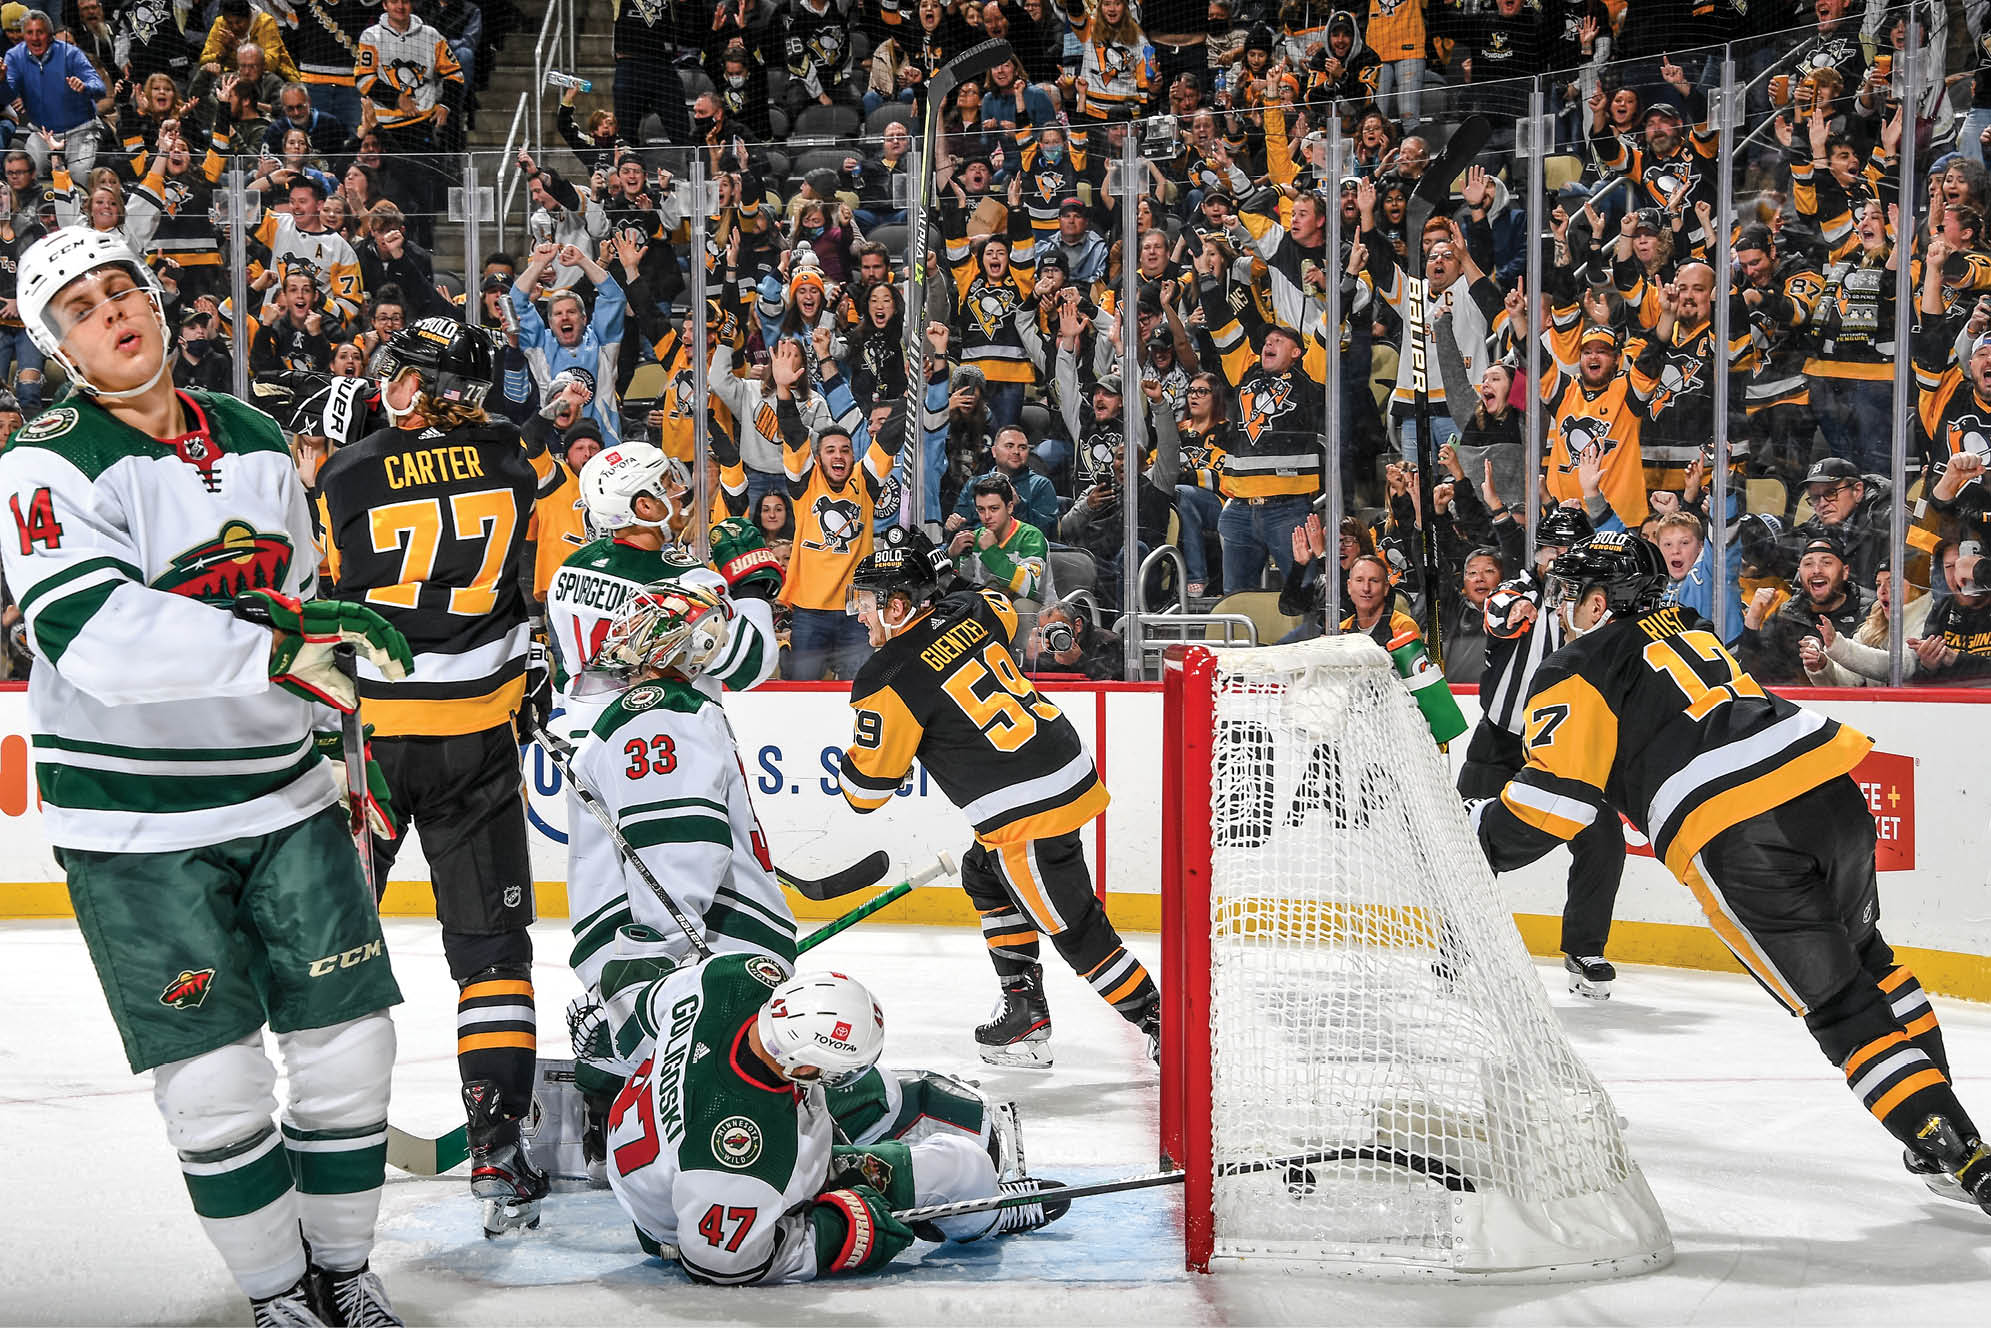 November 6, 2021 - Pittsburgh Penguins vs Minnesota Wild at PPG Paints Arena  Minnesota won the game 5-4 in a shootout 